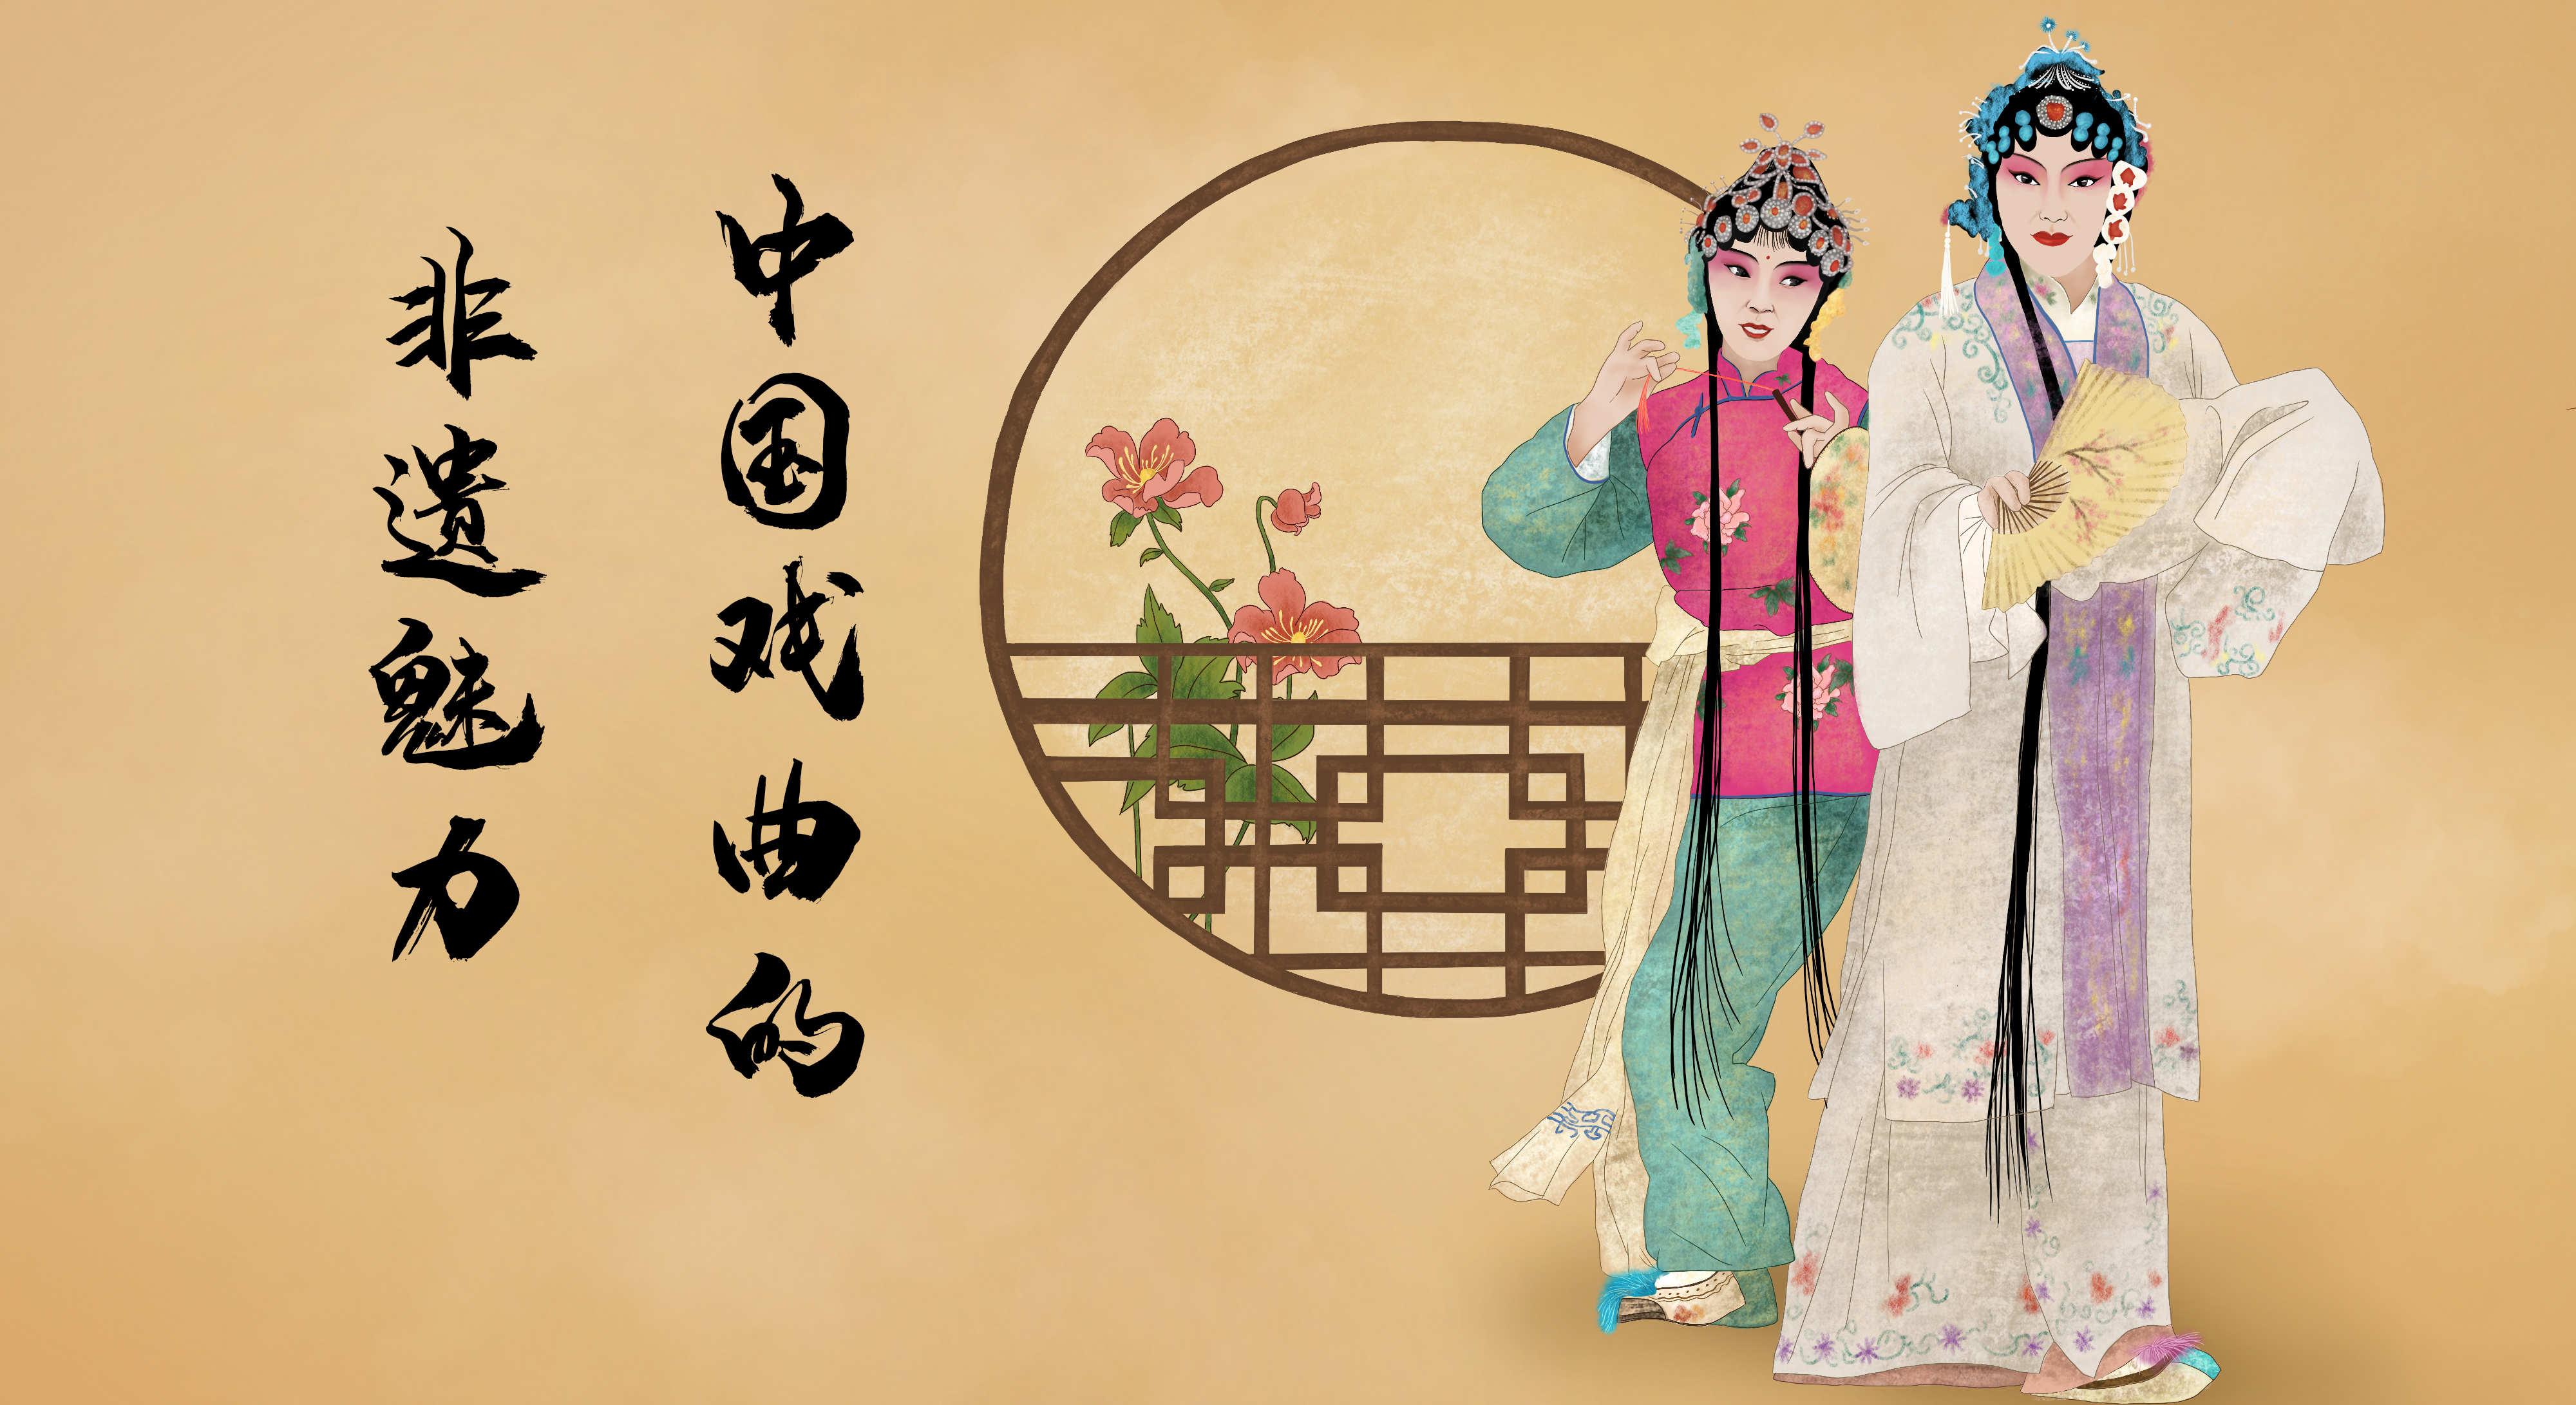 Intangible cultural heritage charm of Chinese opera